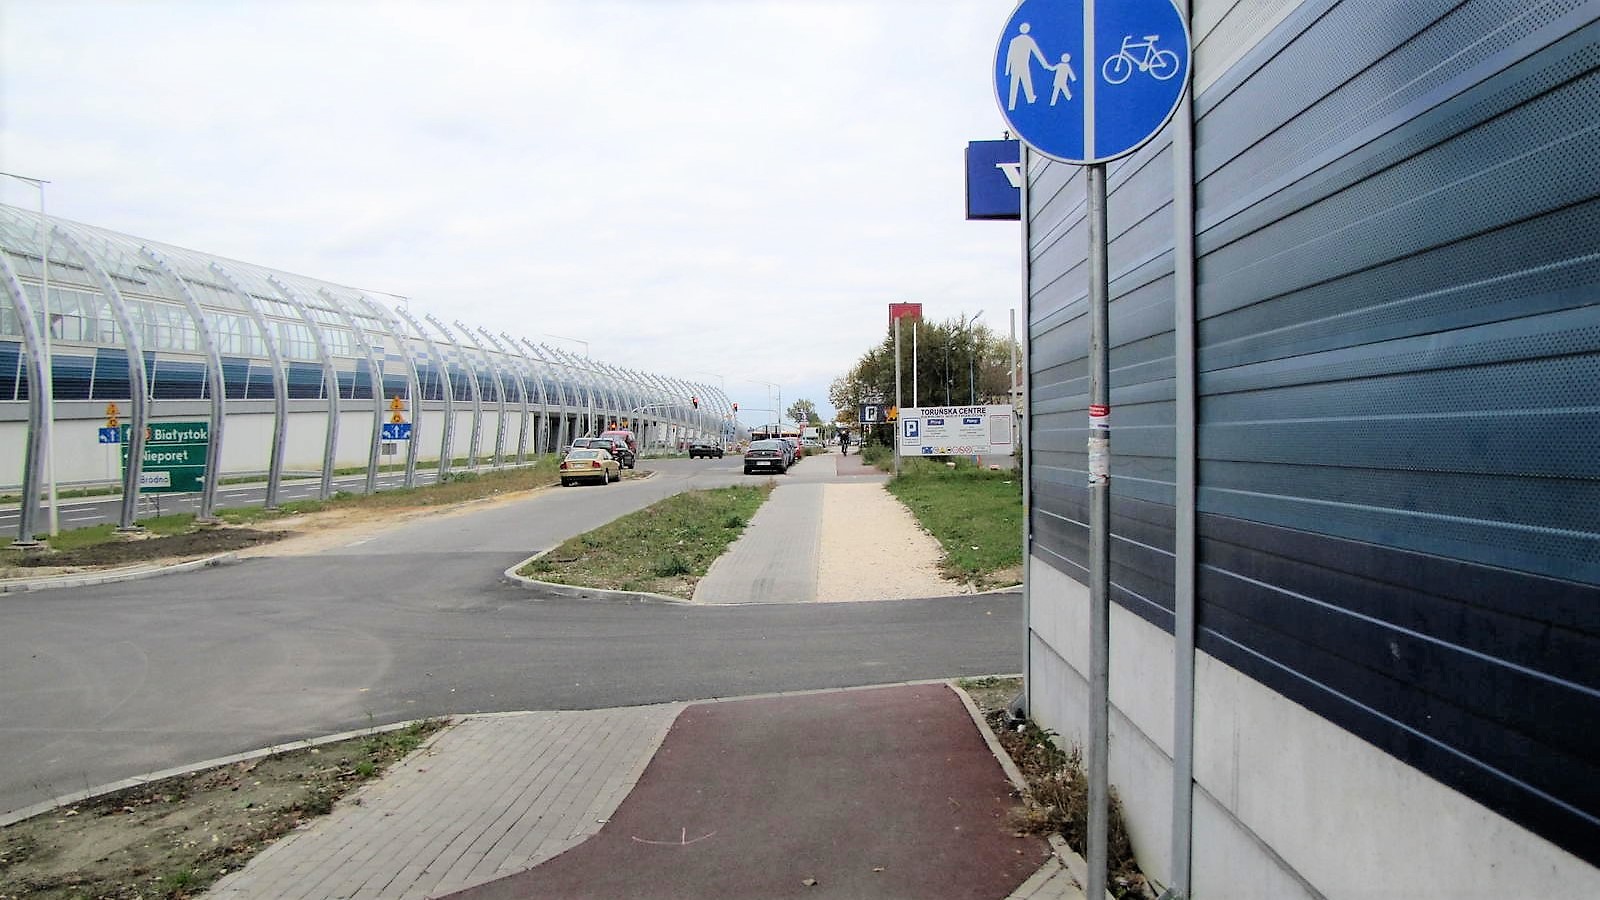 Many Member States lack the necessary knowledge on how to take into account the needs of cyclists. This cycling path was built as a part of a TEN-T road reconstruction project and underwent Road Safety Audit, but it is not safe to use because of lack of visibility on crossing.